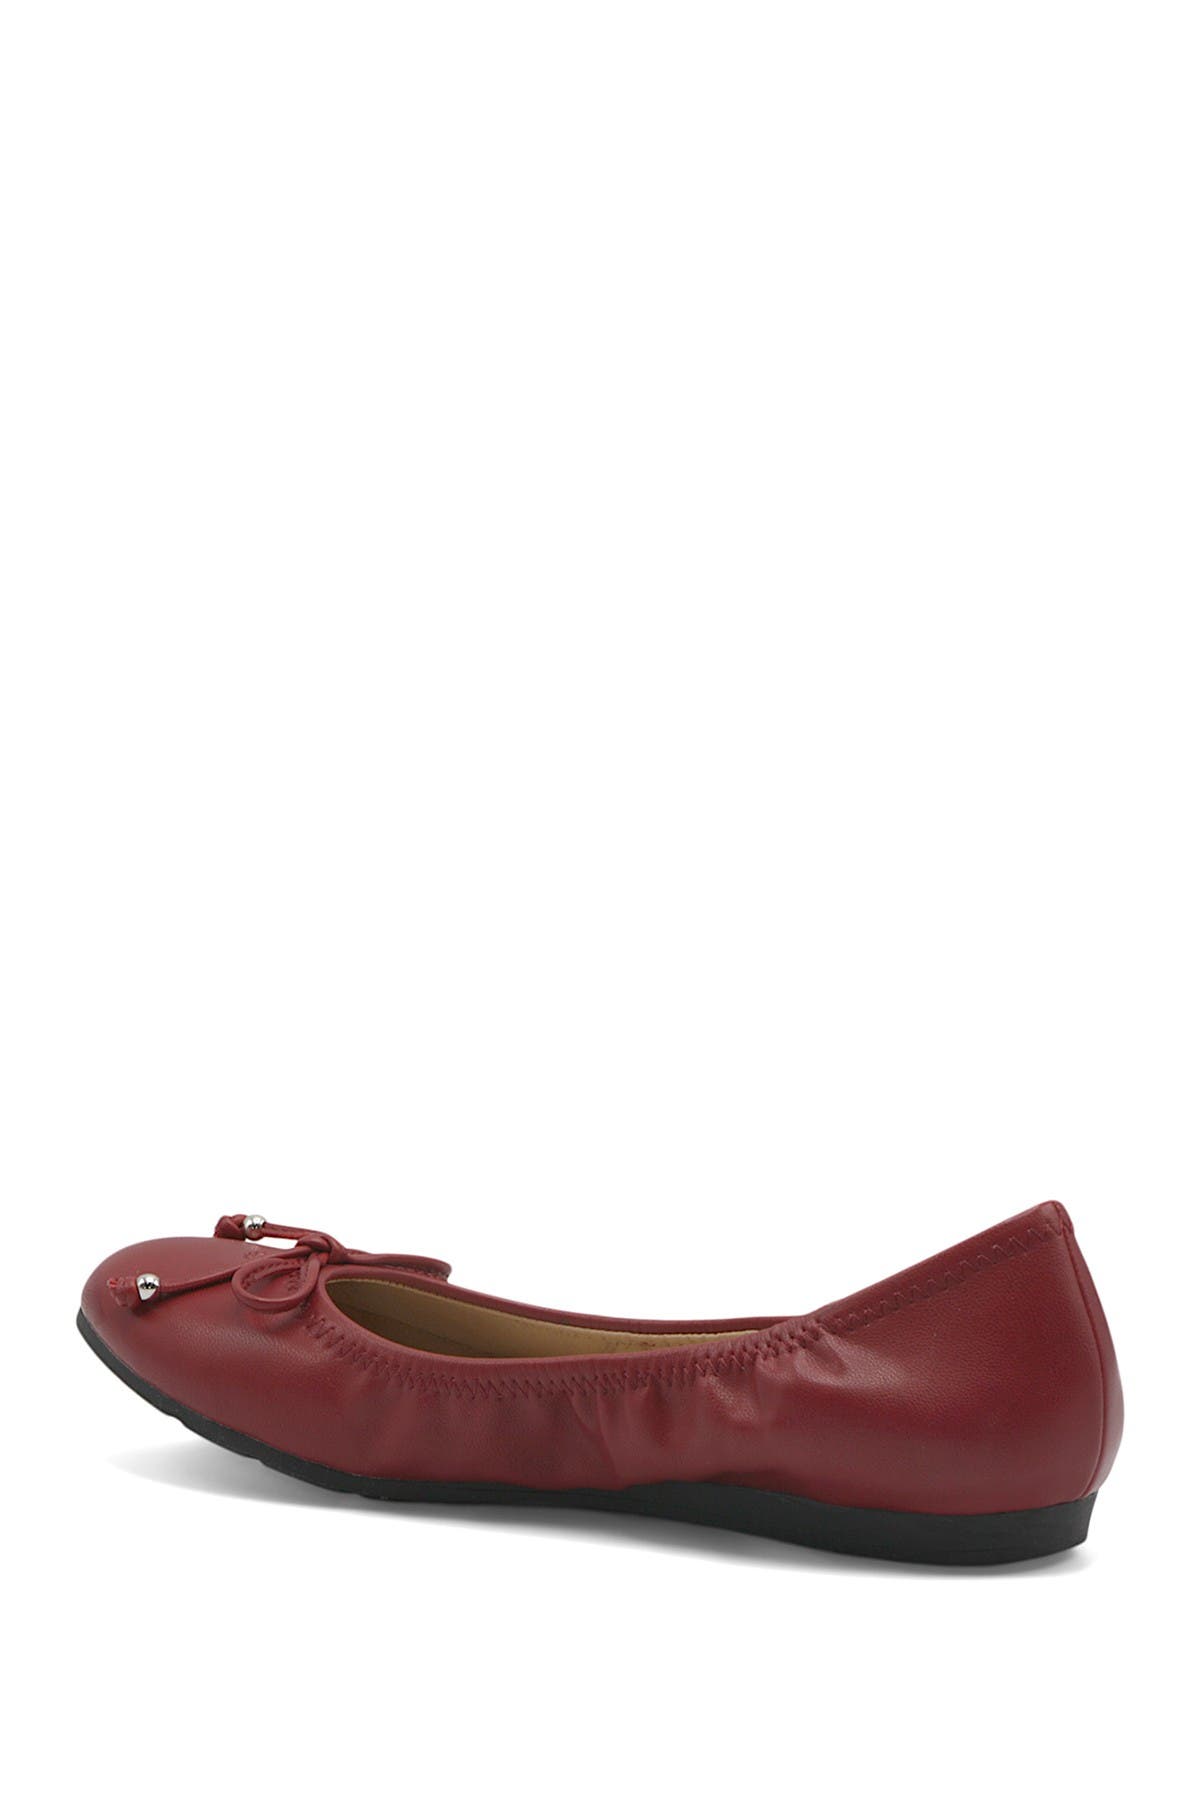 Mootsies Tootsies Cameo Ballet Flat In Red